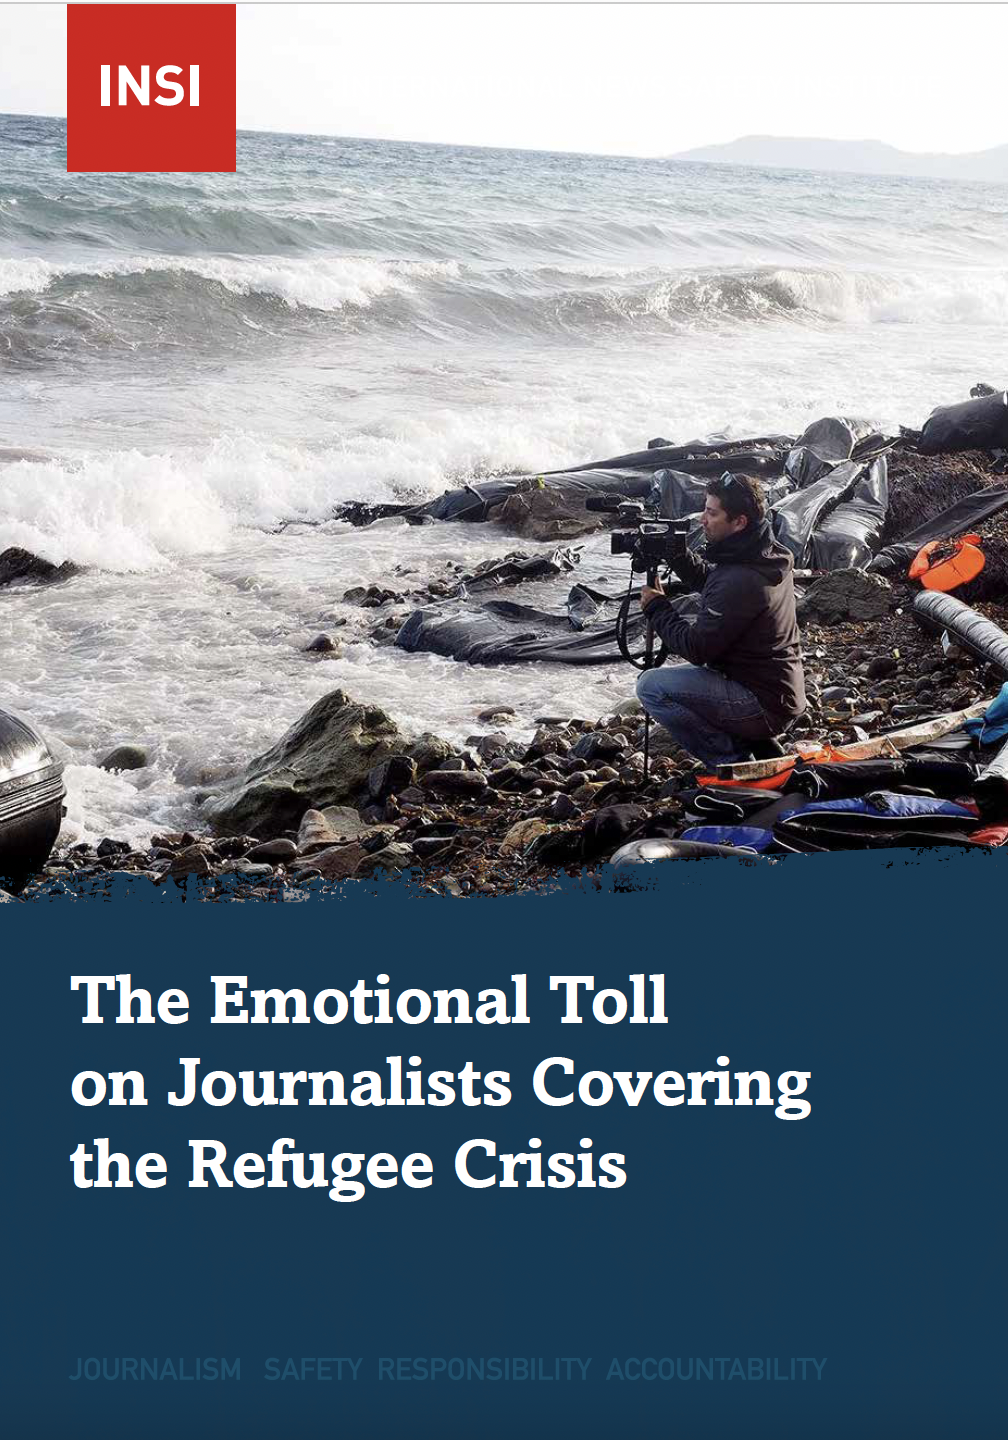 <p>The Emotional Toll on Journalists Covering the Refugee Crisis.</p>